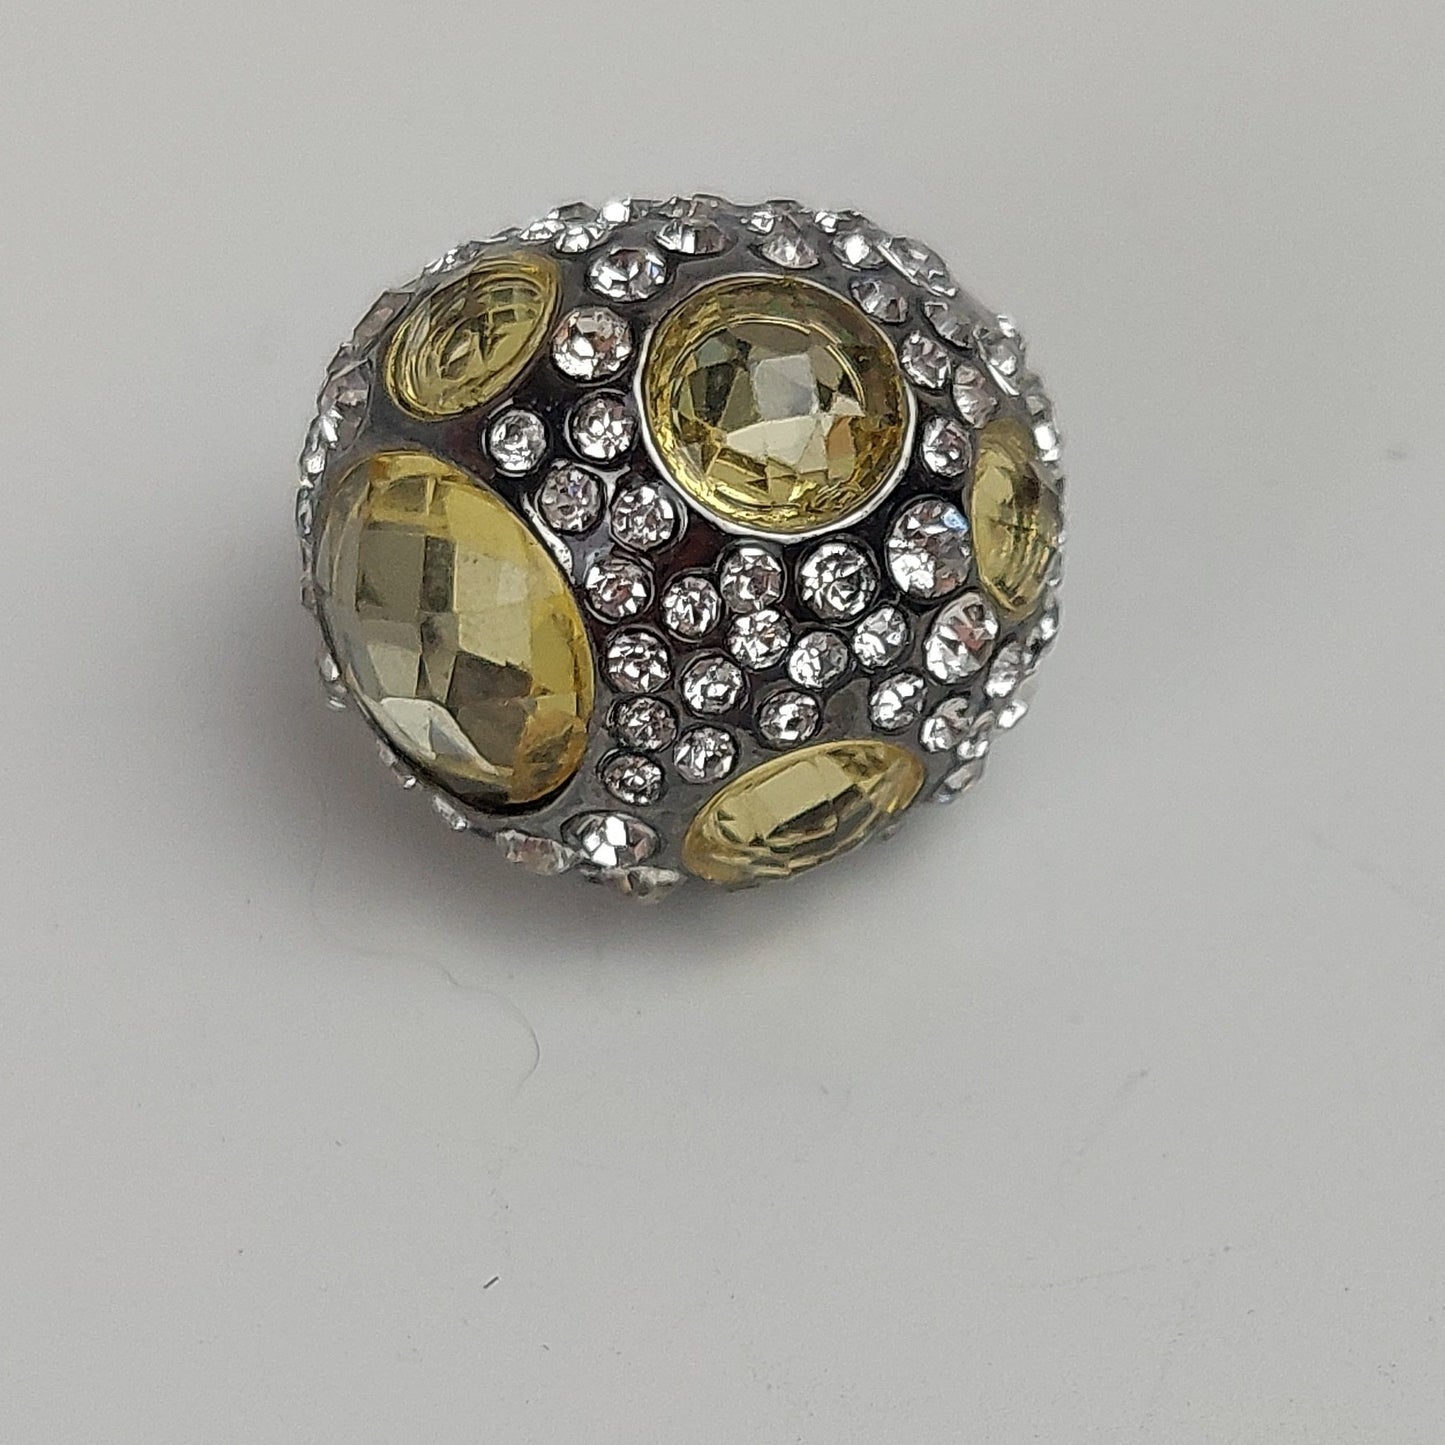 Pewter Tone Domed Jeweled Ring Yellow and Clear Stones Size 7 Statement Retro